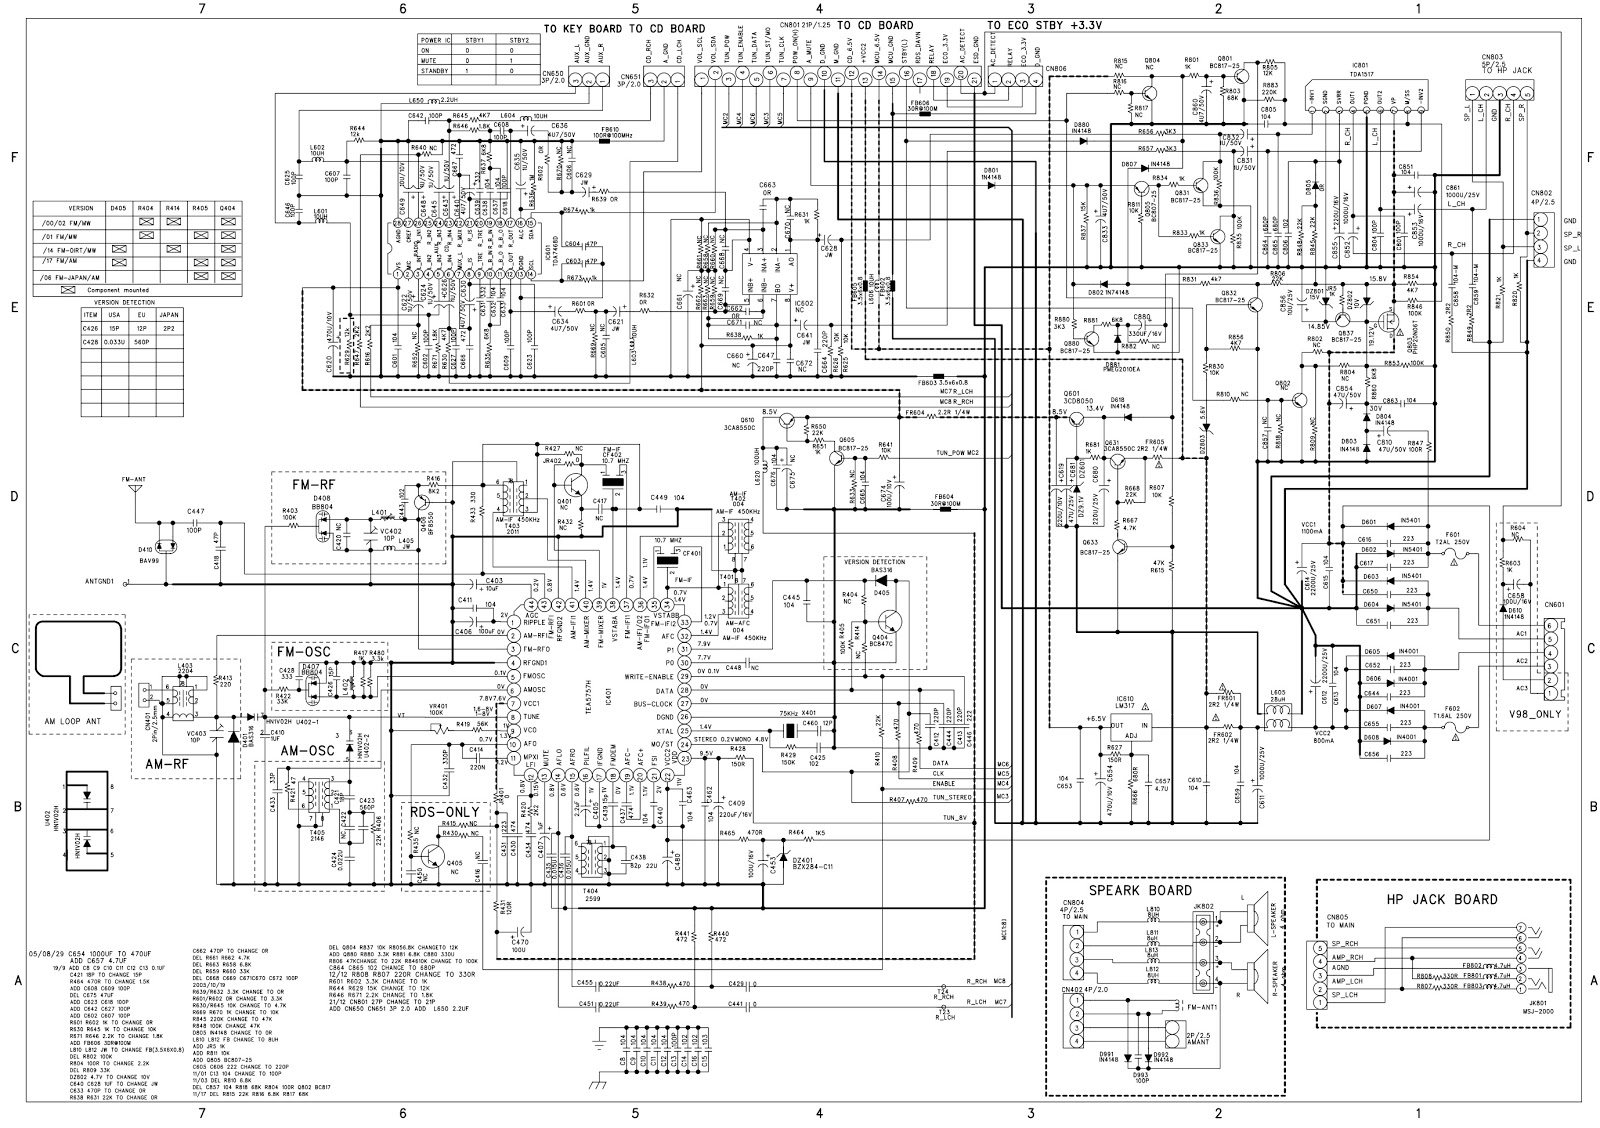 Schematic Diagrams: Philips MCM275 Micro system - schematic